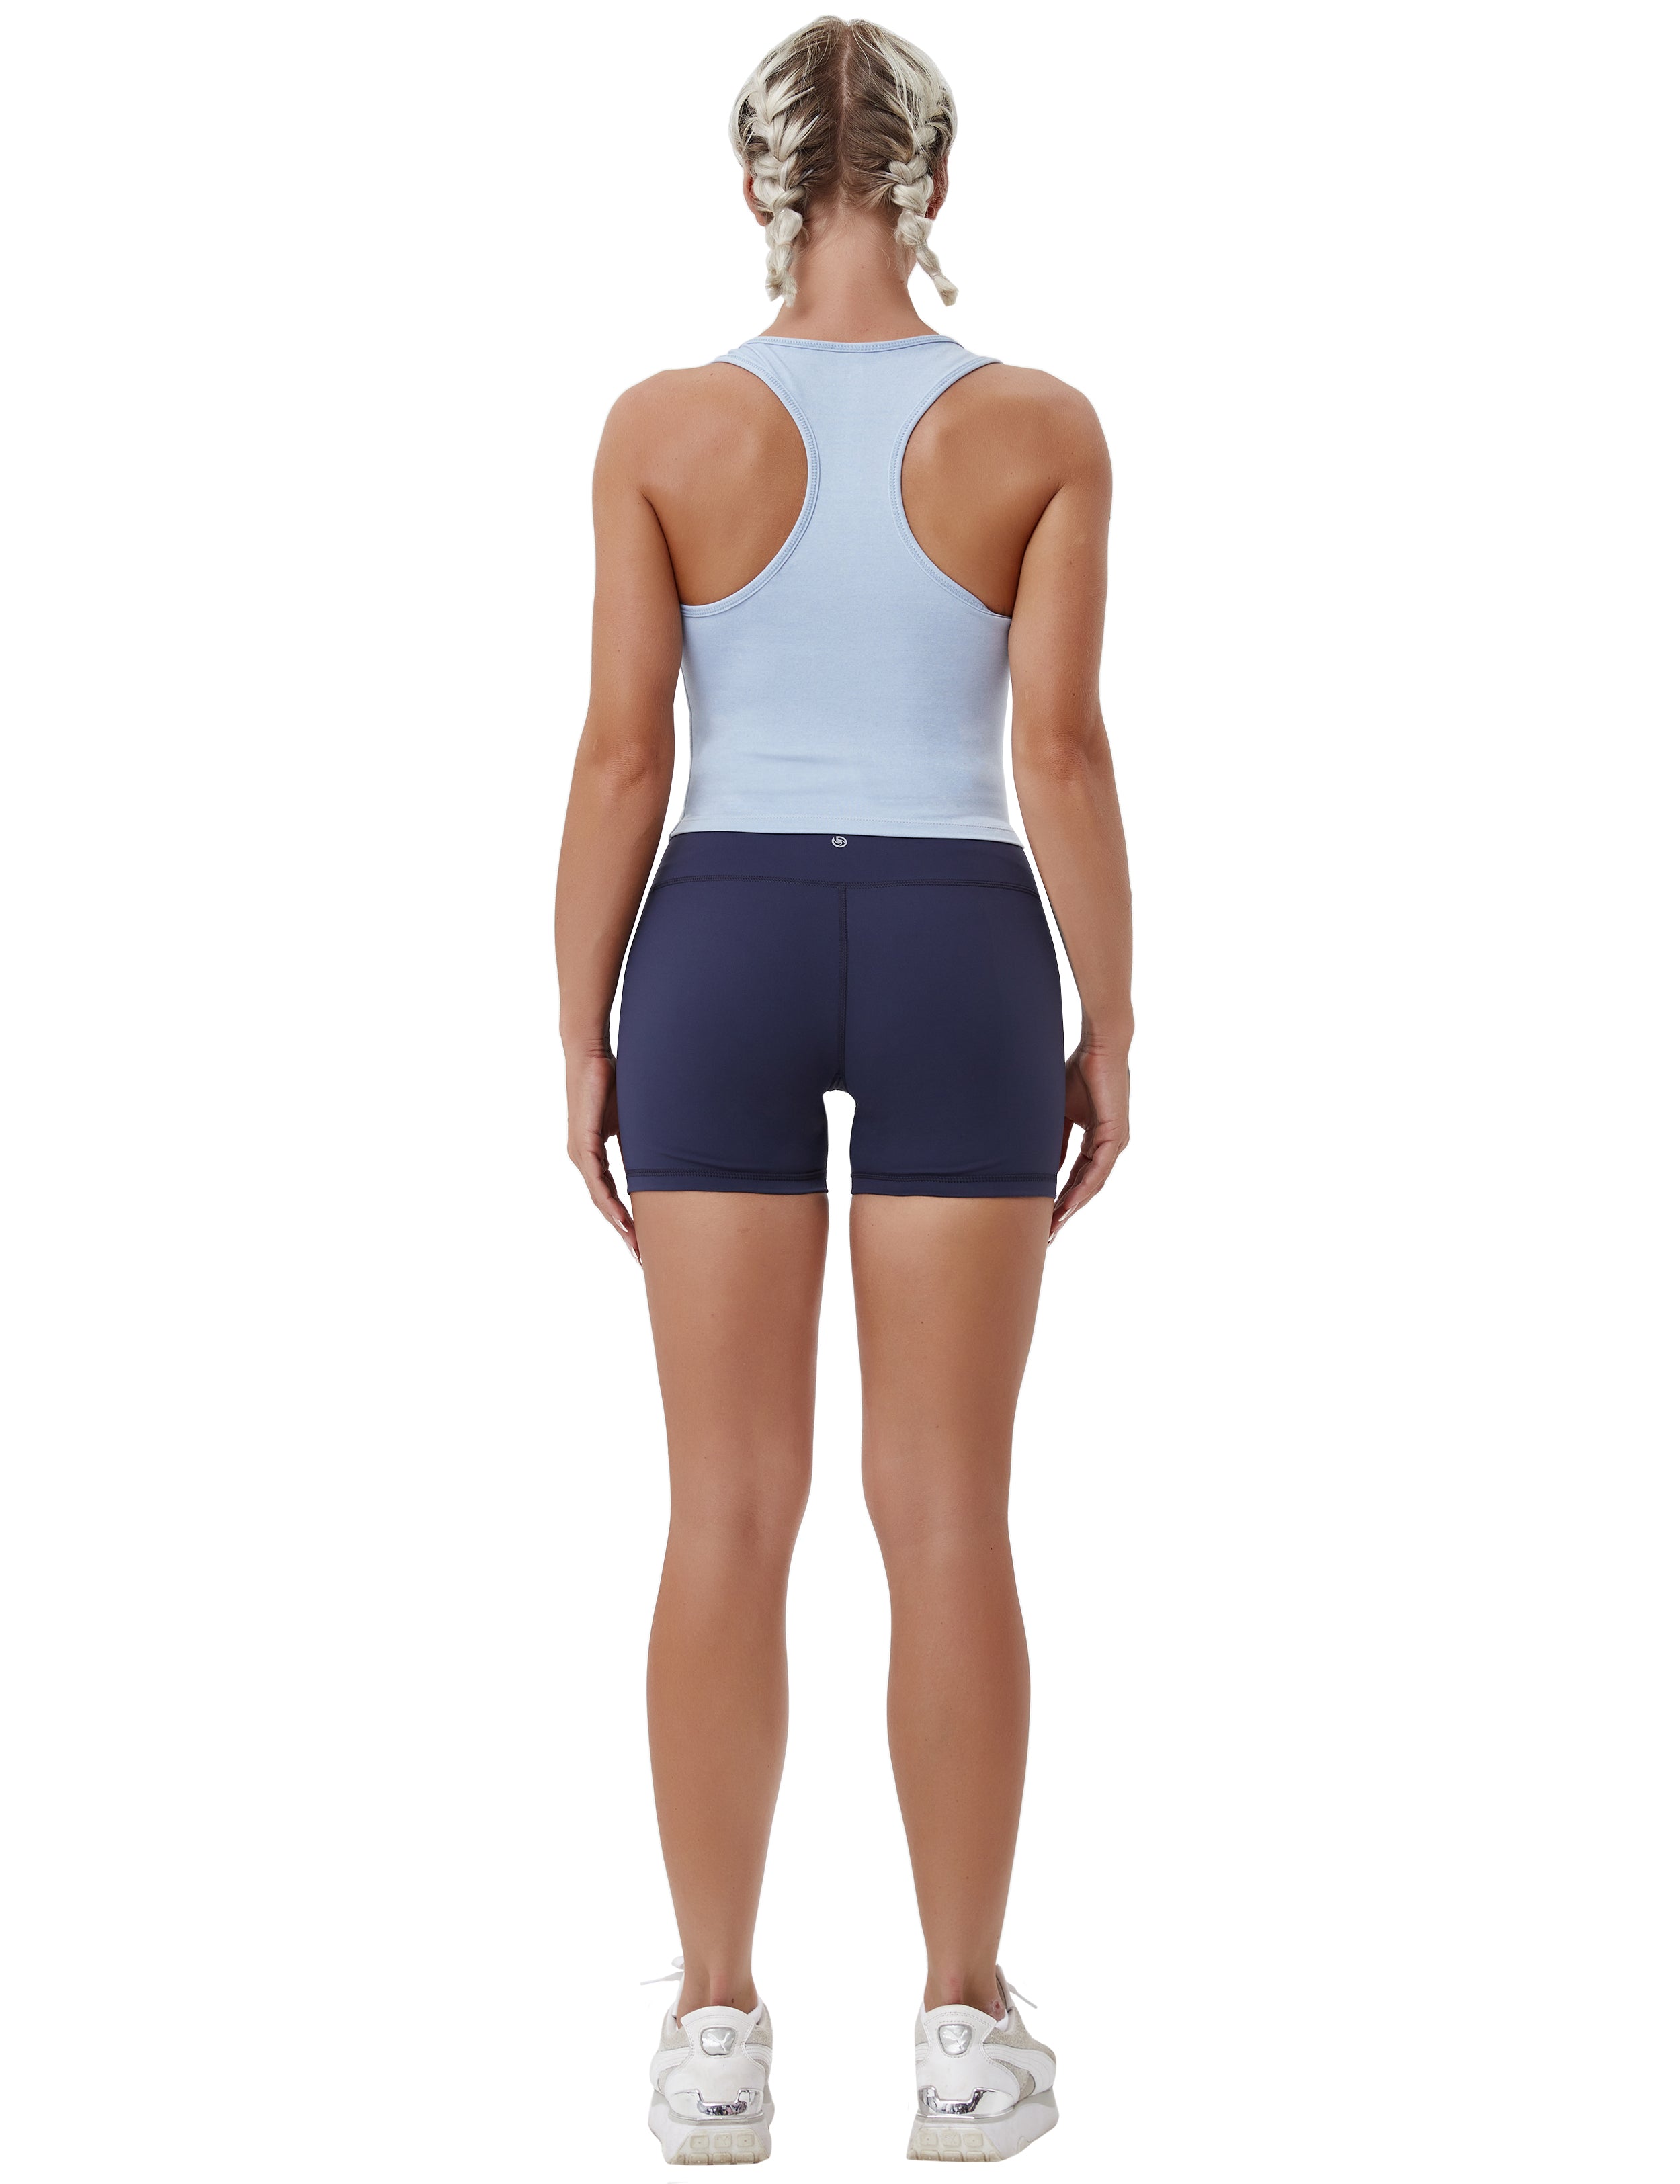 Racerback Athletic Crop Tank Tops heatherblue 92%Nylon/8%Spandex(Cotton Soft) Designed for Yoga Tight Fit So buttery soft, it feels weightless Sweat-wicking Four-way stretch Breathable Contours your body Sits below the waistband for moderate, everyday coverage